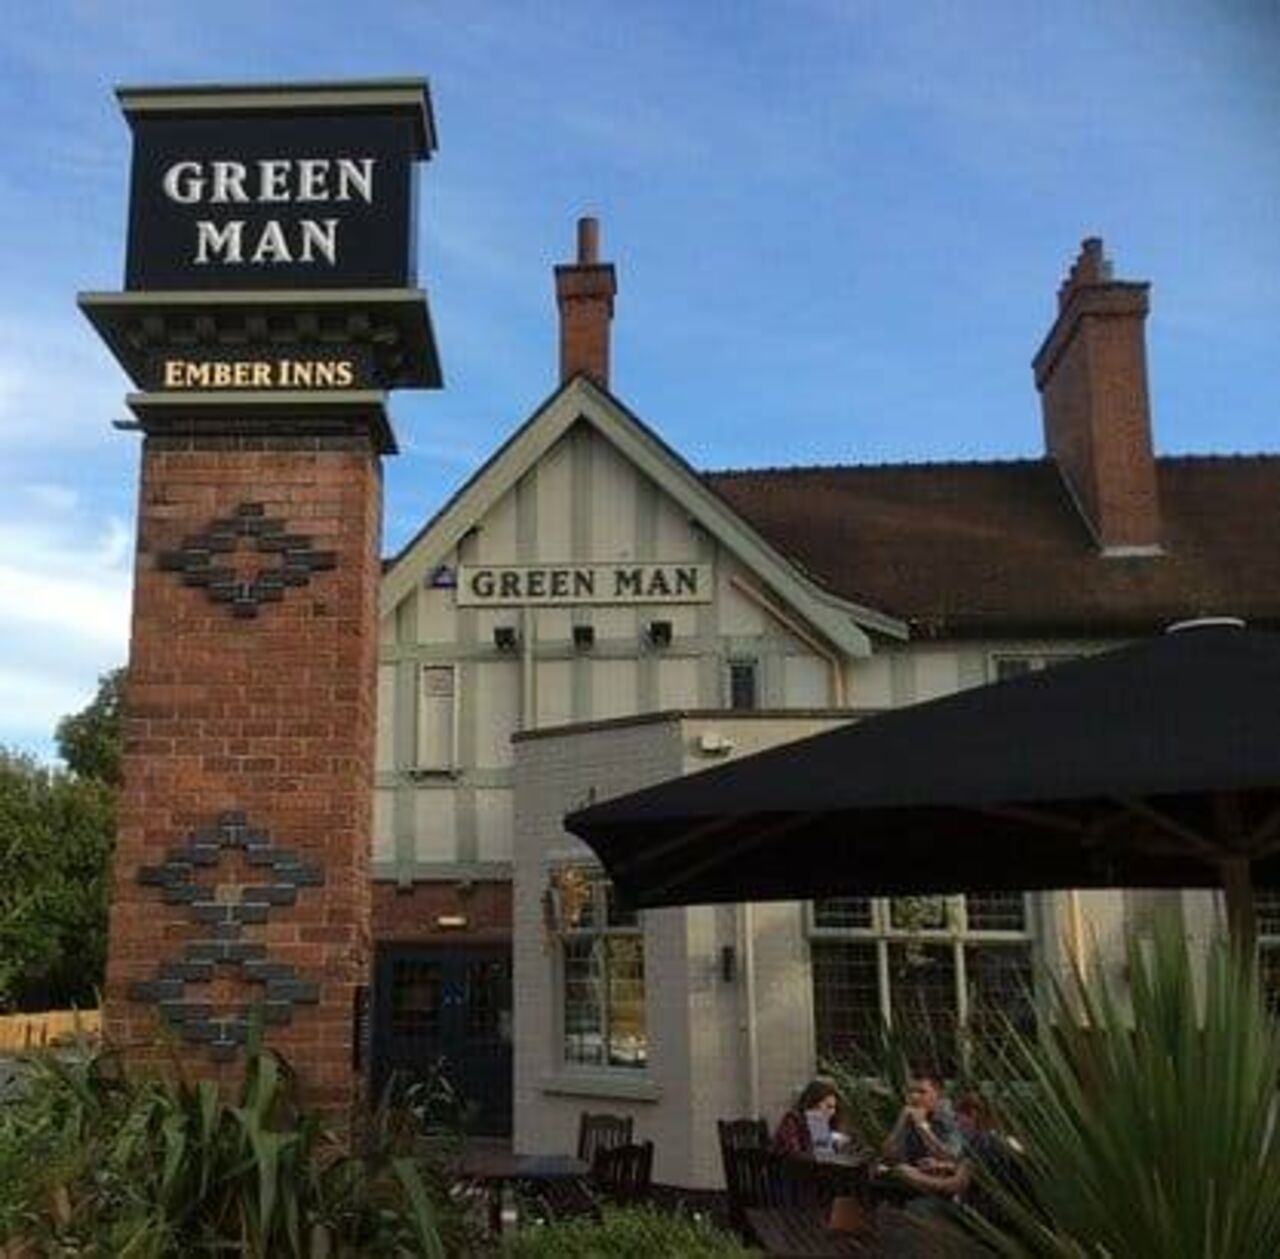 A photo of The Green Man